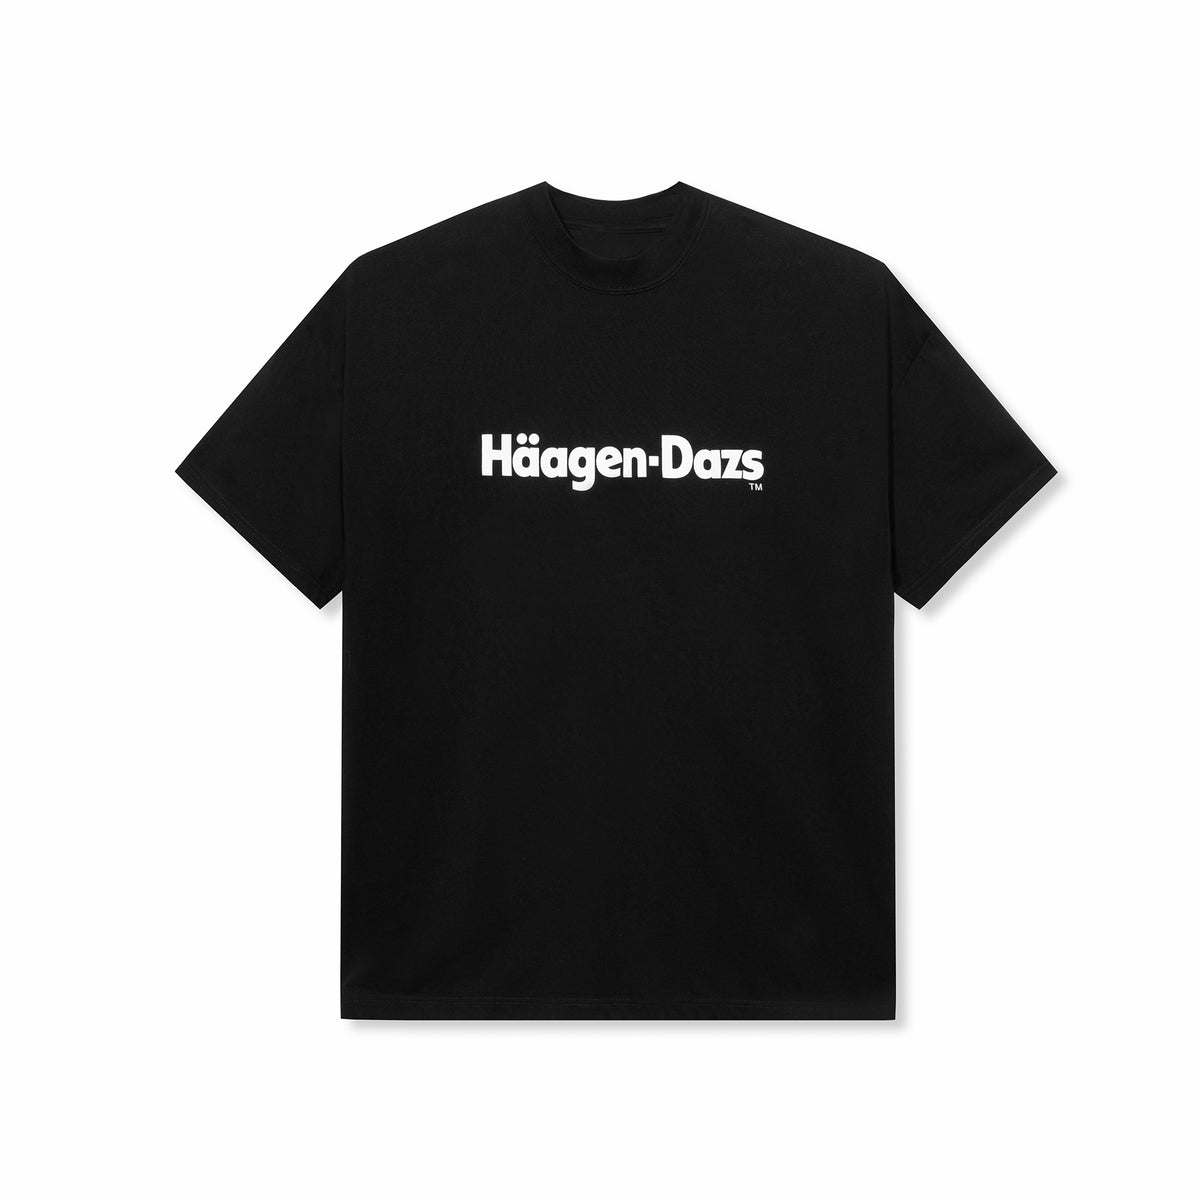 WASTED YOUTH X HÄAGEN-DAZS BLACK T-SHIRT - Tシャツ/カットソー(半袖 ...